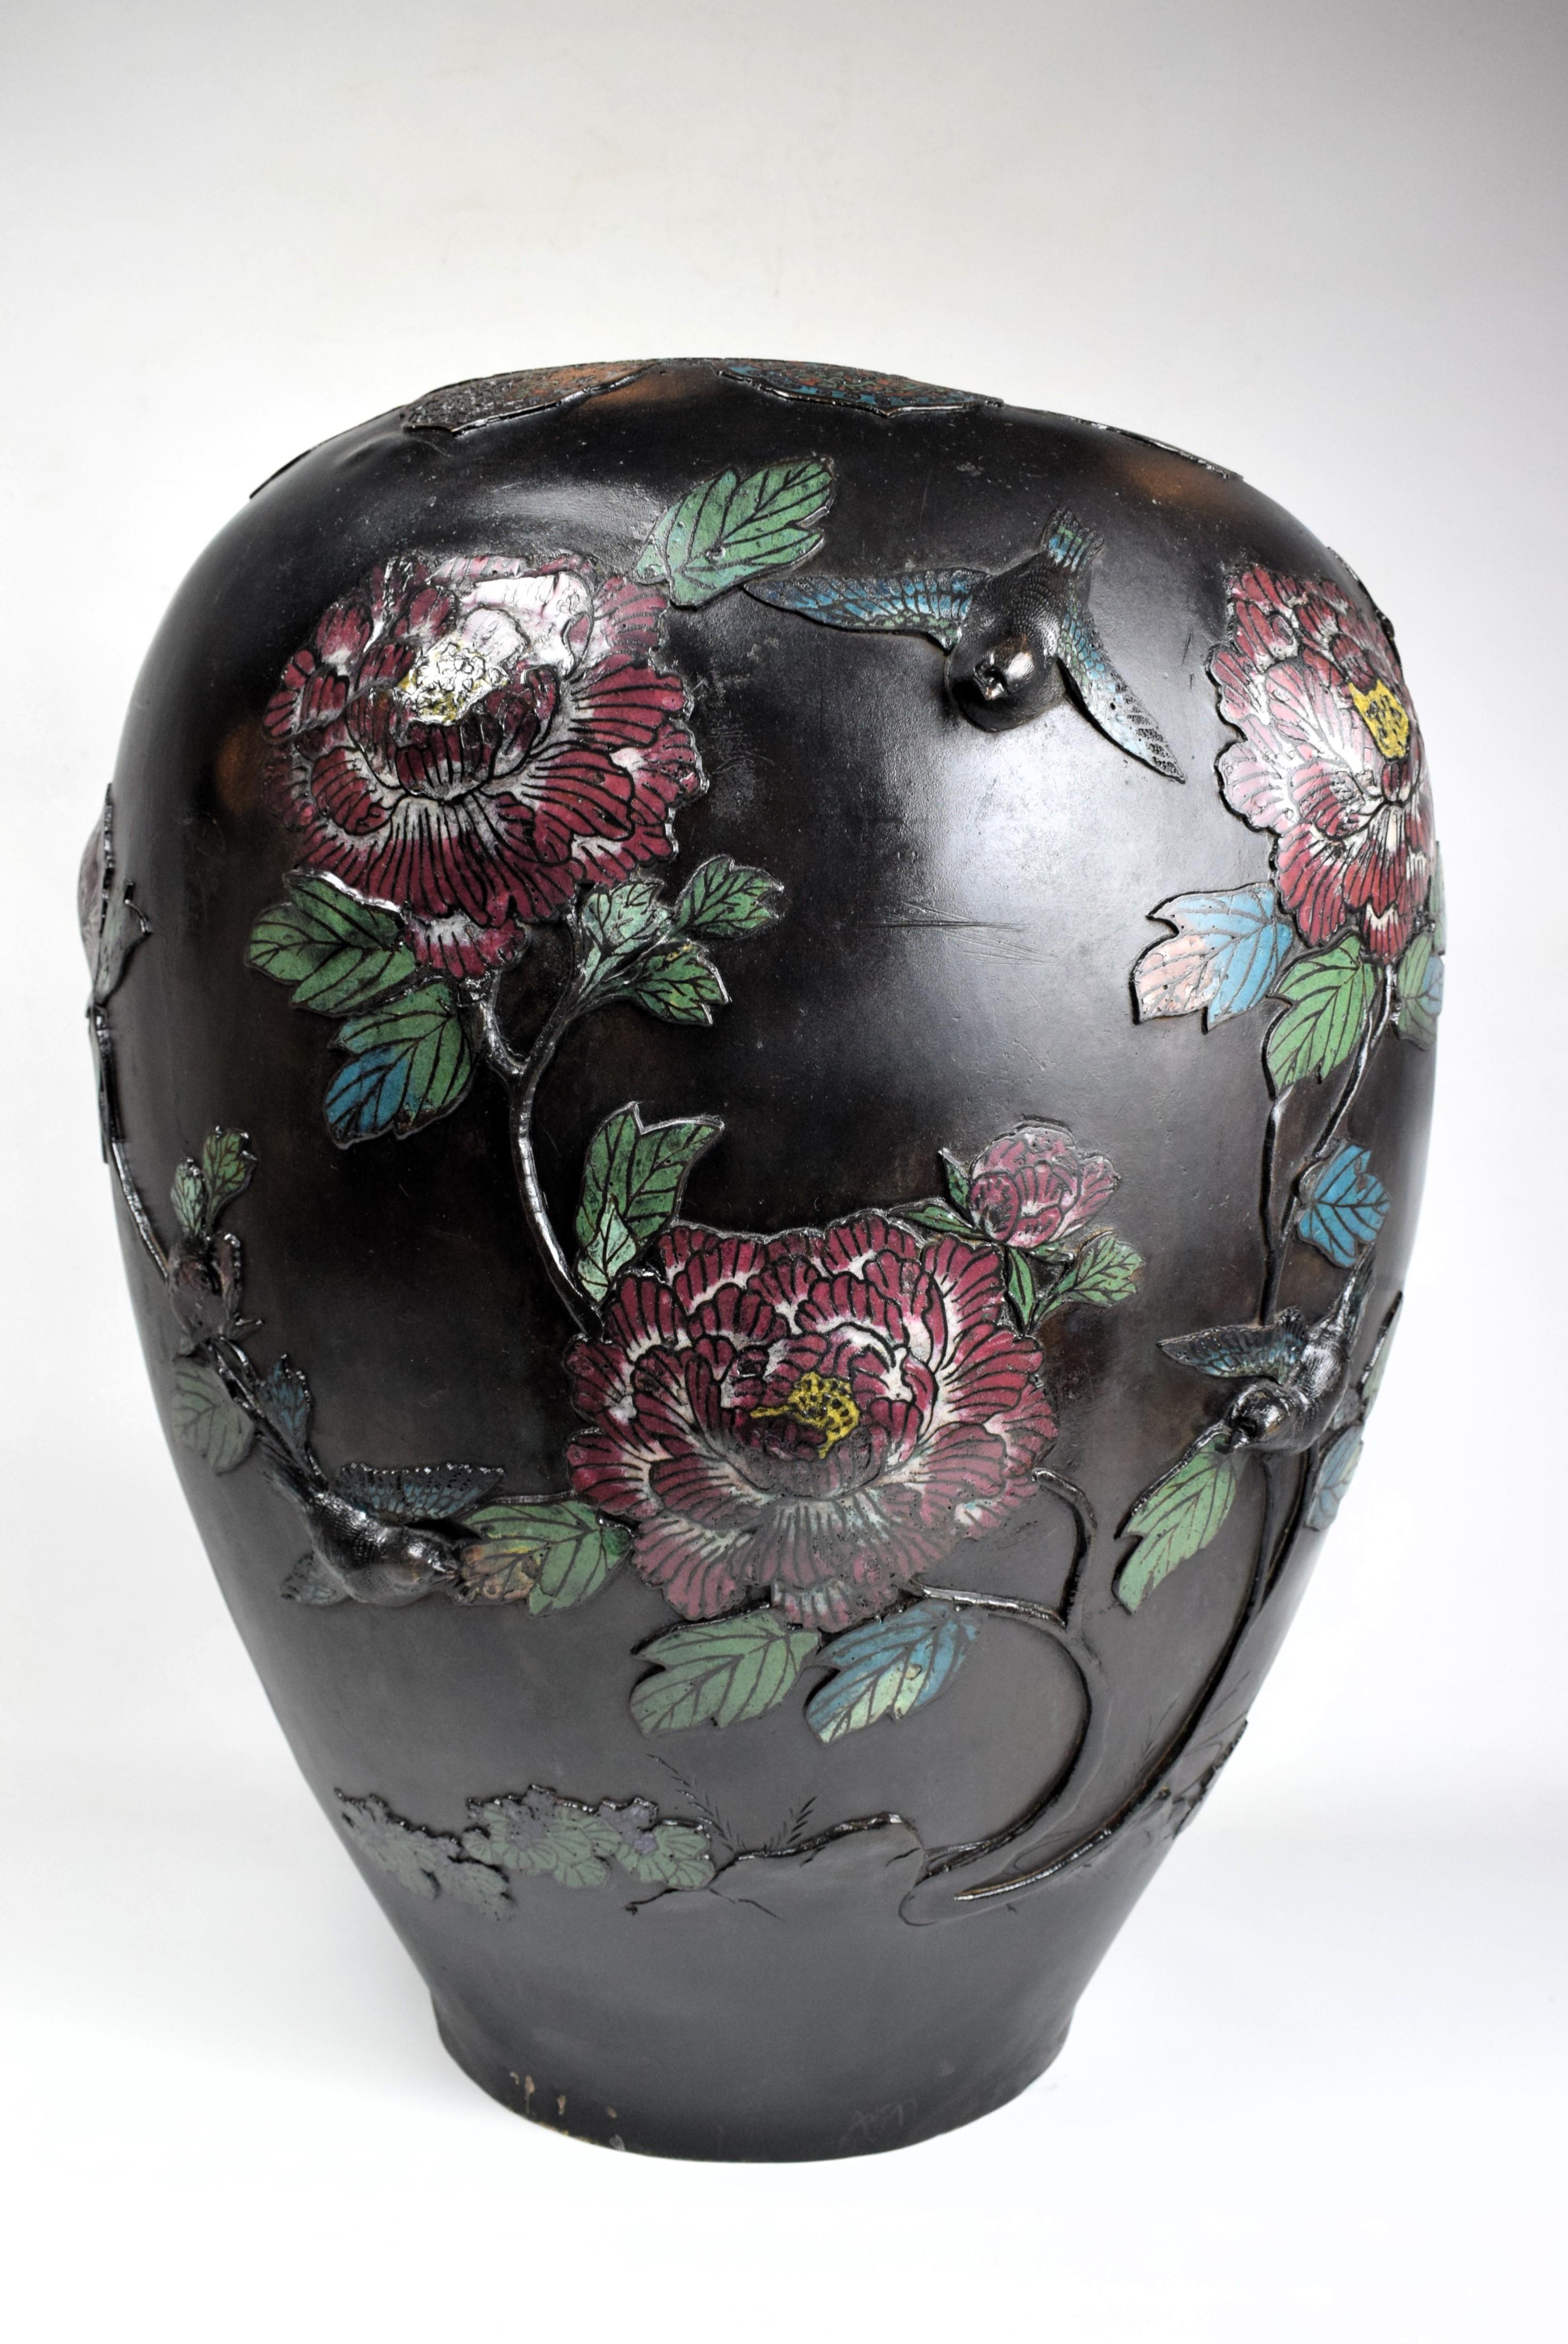 Large Japanese, Bronze Relief Enameled Vase, Early 20th Century

The vase's surface is adorned with intricate relief work that depicts a stunning tableau of flowers and birds. The relief work is meticulously crafted, creating a three-dimensional